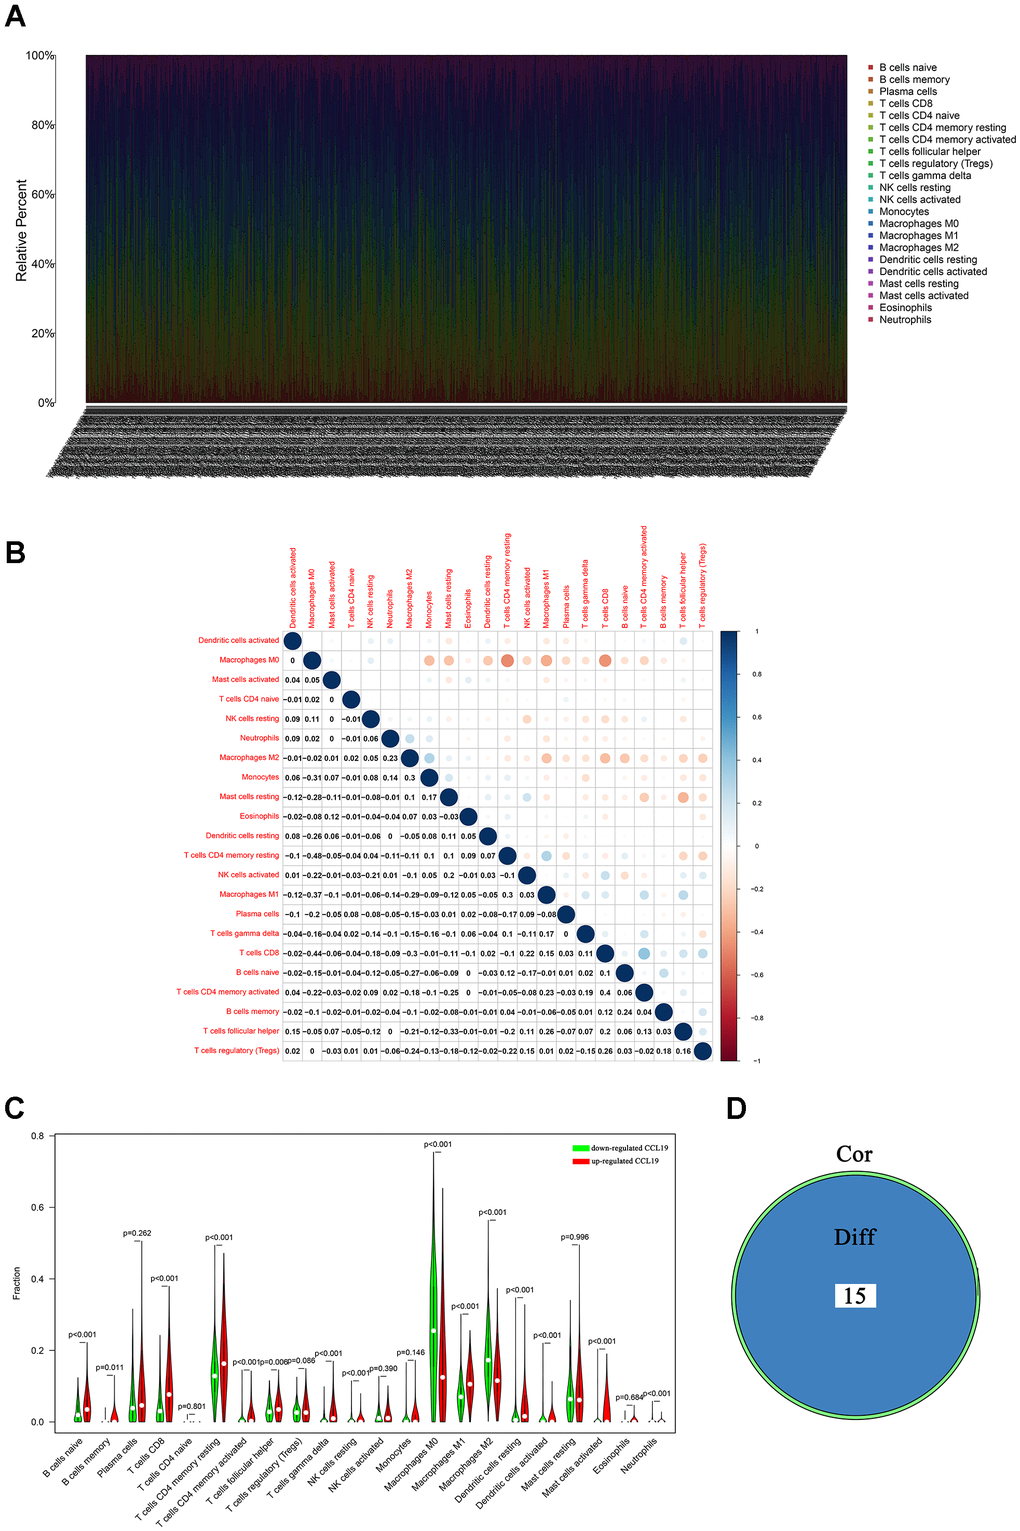 TIC profile and differential analysis. (A) Barplot showed the proportion of 22 TICs in breast cancer samples; (B) The diagram showed the associations between 22 TICs; each spot indicated the p value of the association between two TICs; (C) Violin plot showed the correlation between 22 TICs and the expression of CCL19; pD) Venn plot indicated there were 15 TICs shared by the difference test and correlation test showed in violin plots (C) and scatter plots (Figure 7), respectively.